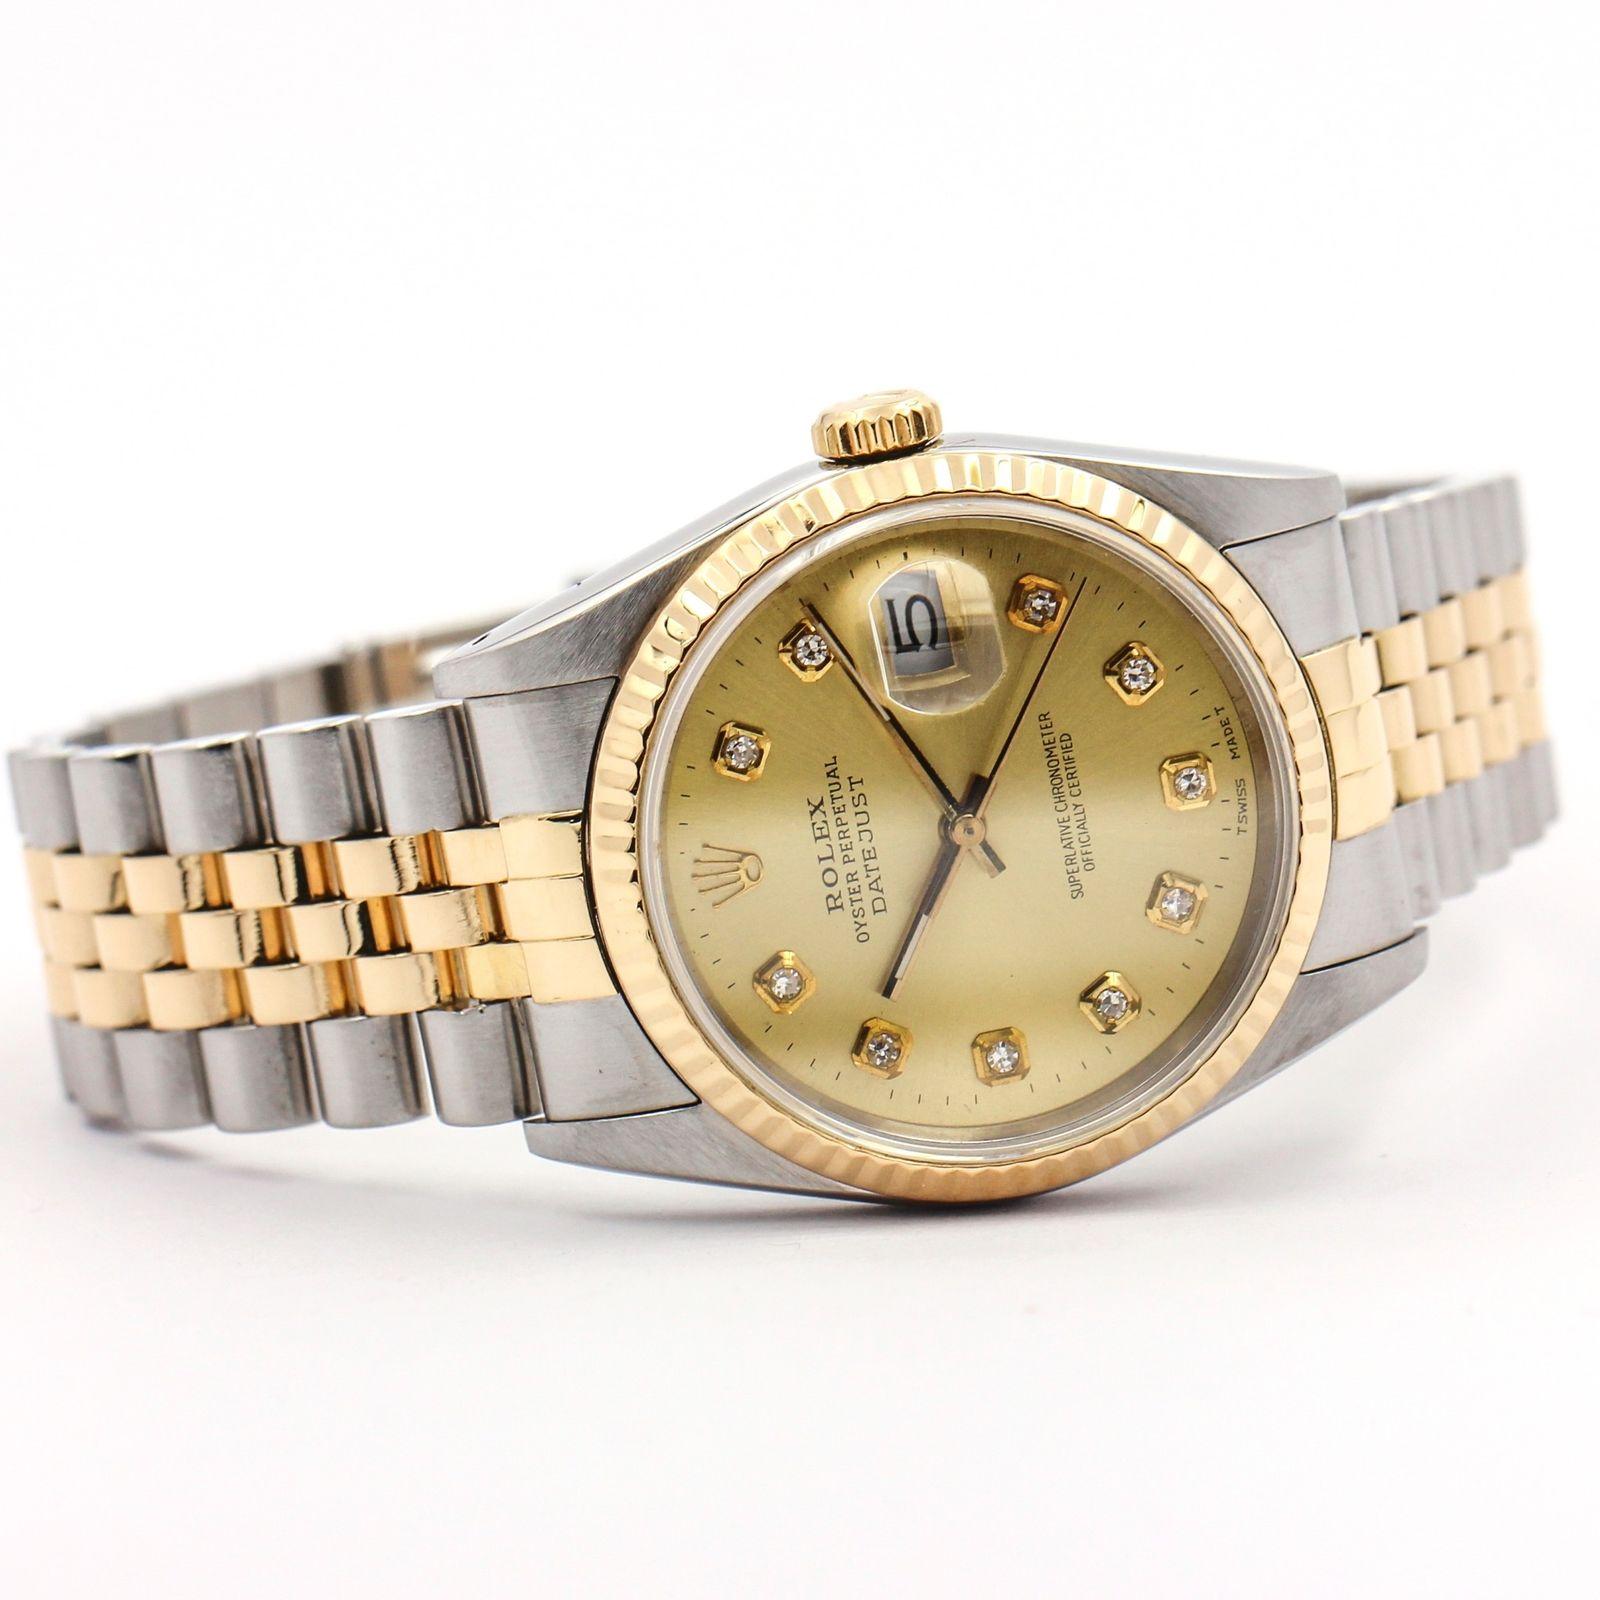 Rolex Datejust 16233 Stainless Steel and 18 Karat Yellow Gold Wristwatch For Sale 1